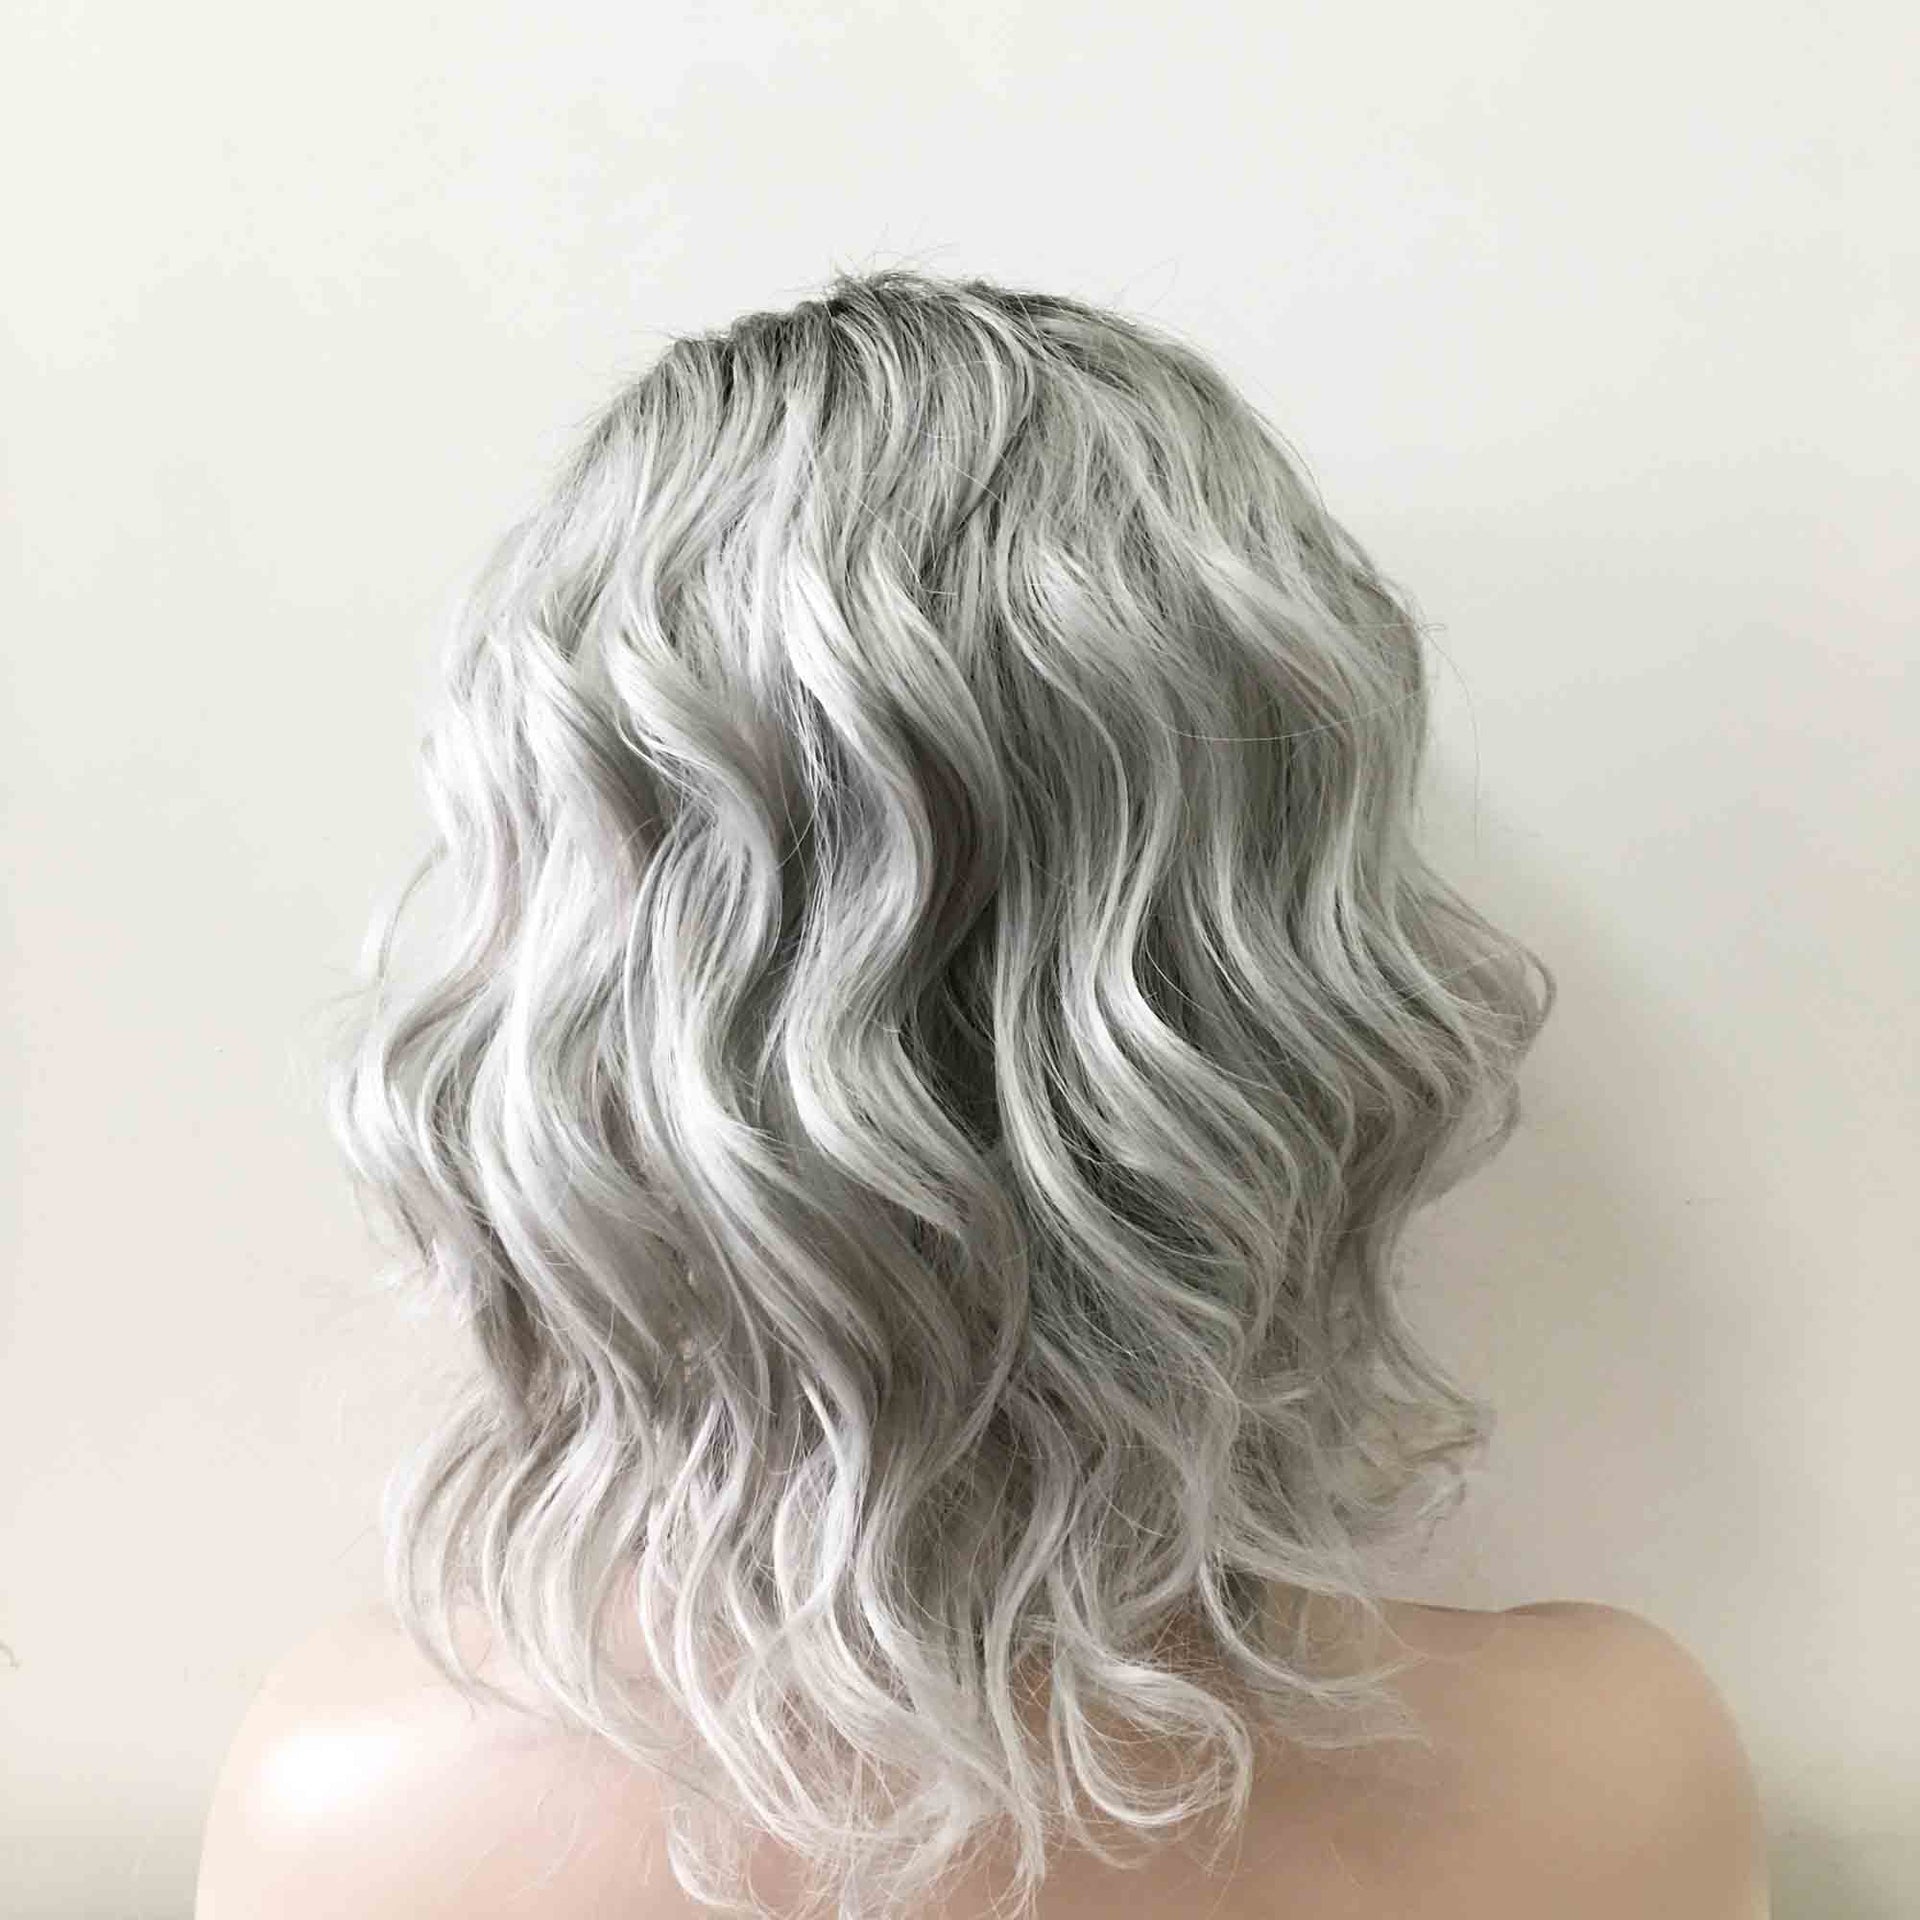 nevermindyrhead Women Grey Ombre Dark Root Short Curly Middle Part Wig